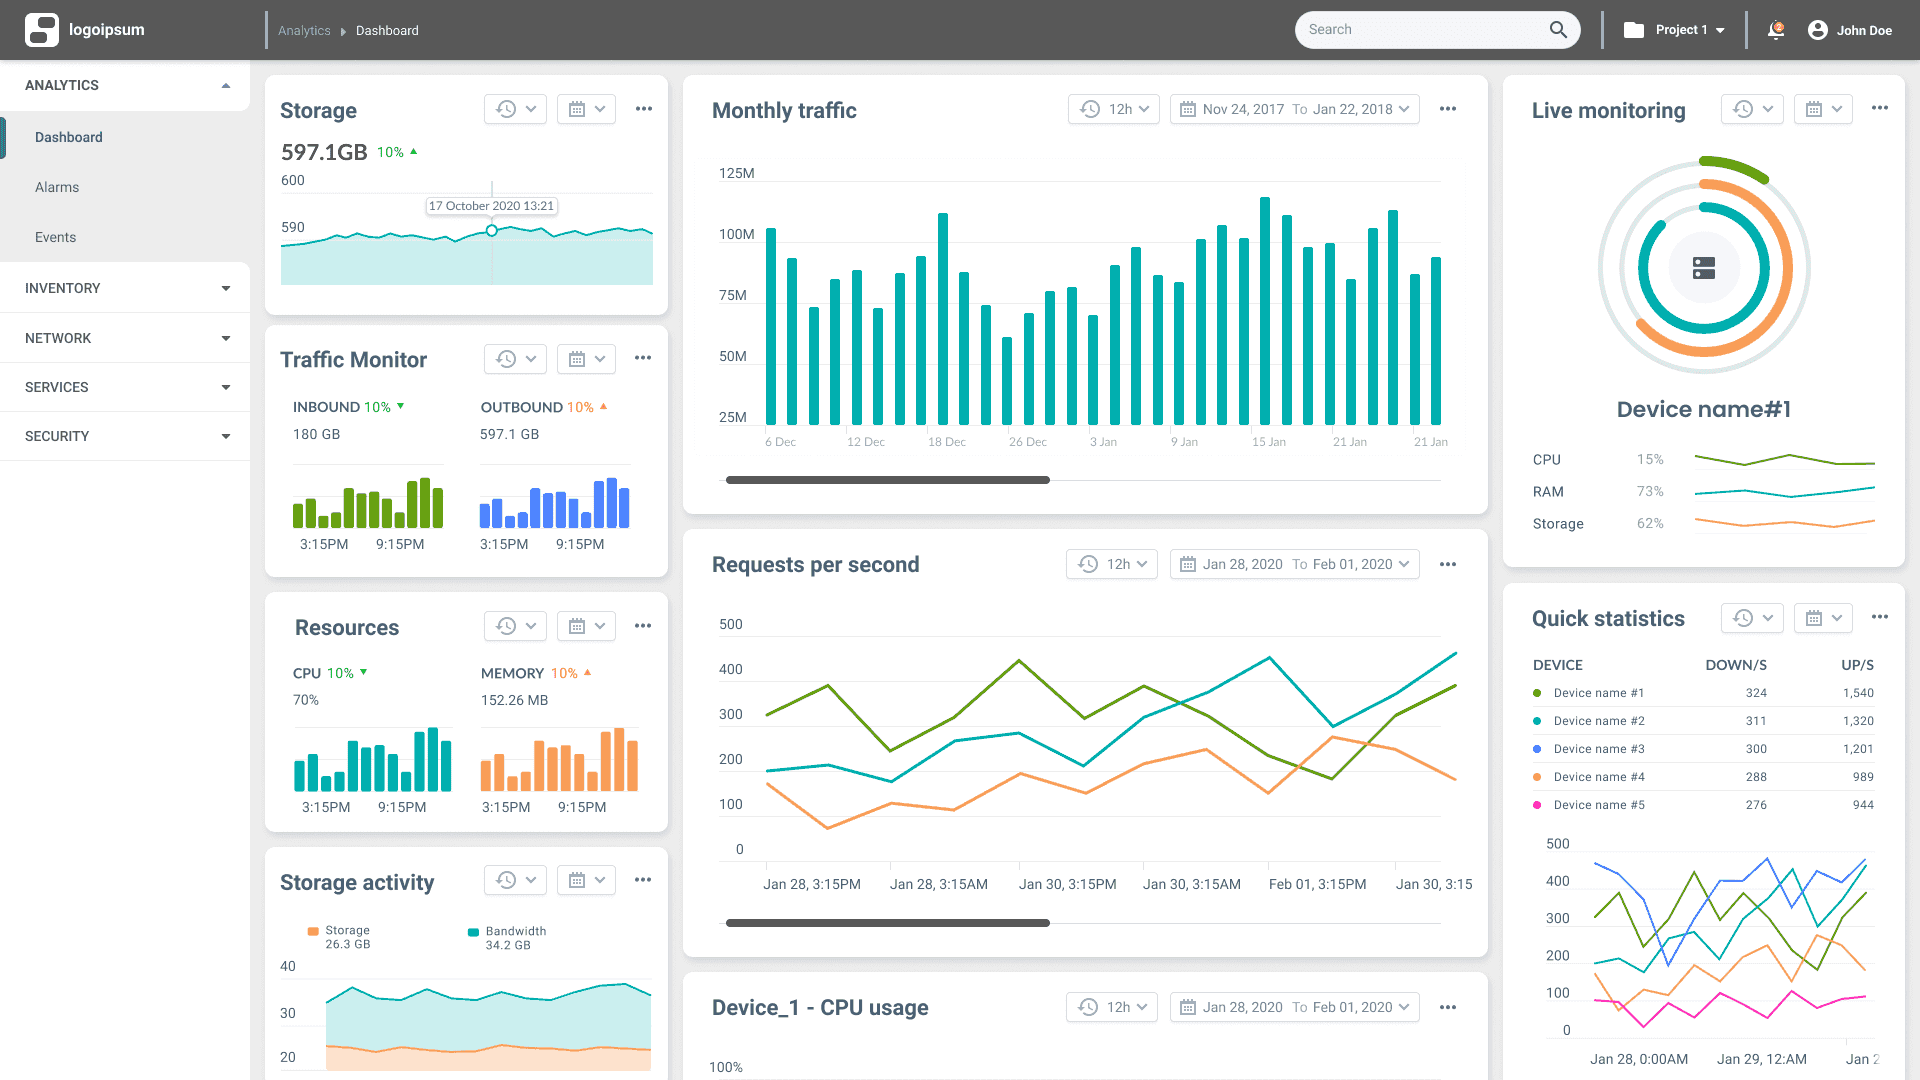 Final product - Dashboard with network statistics